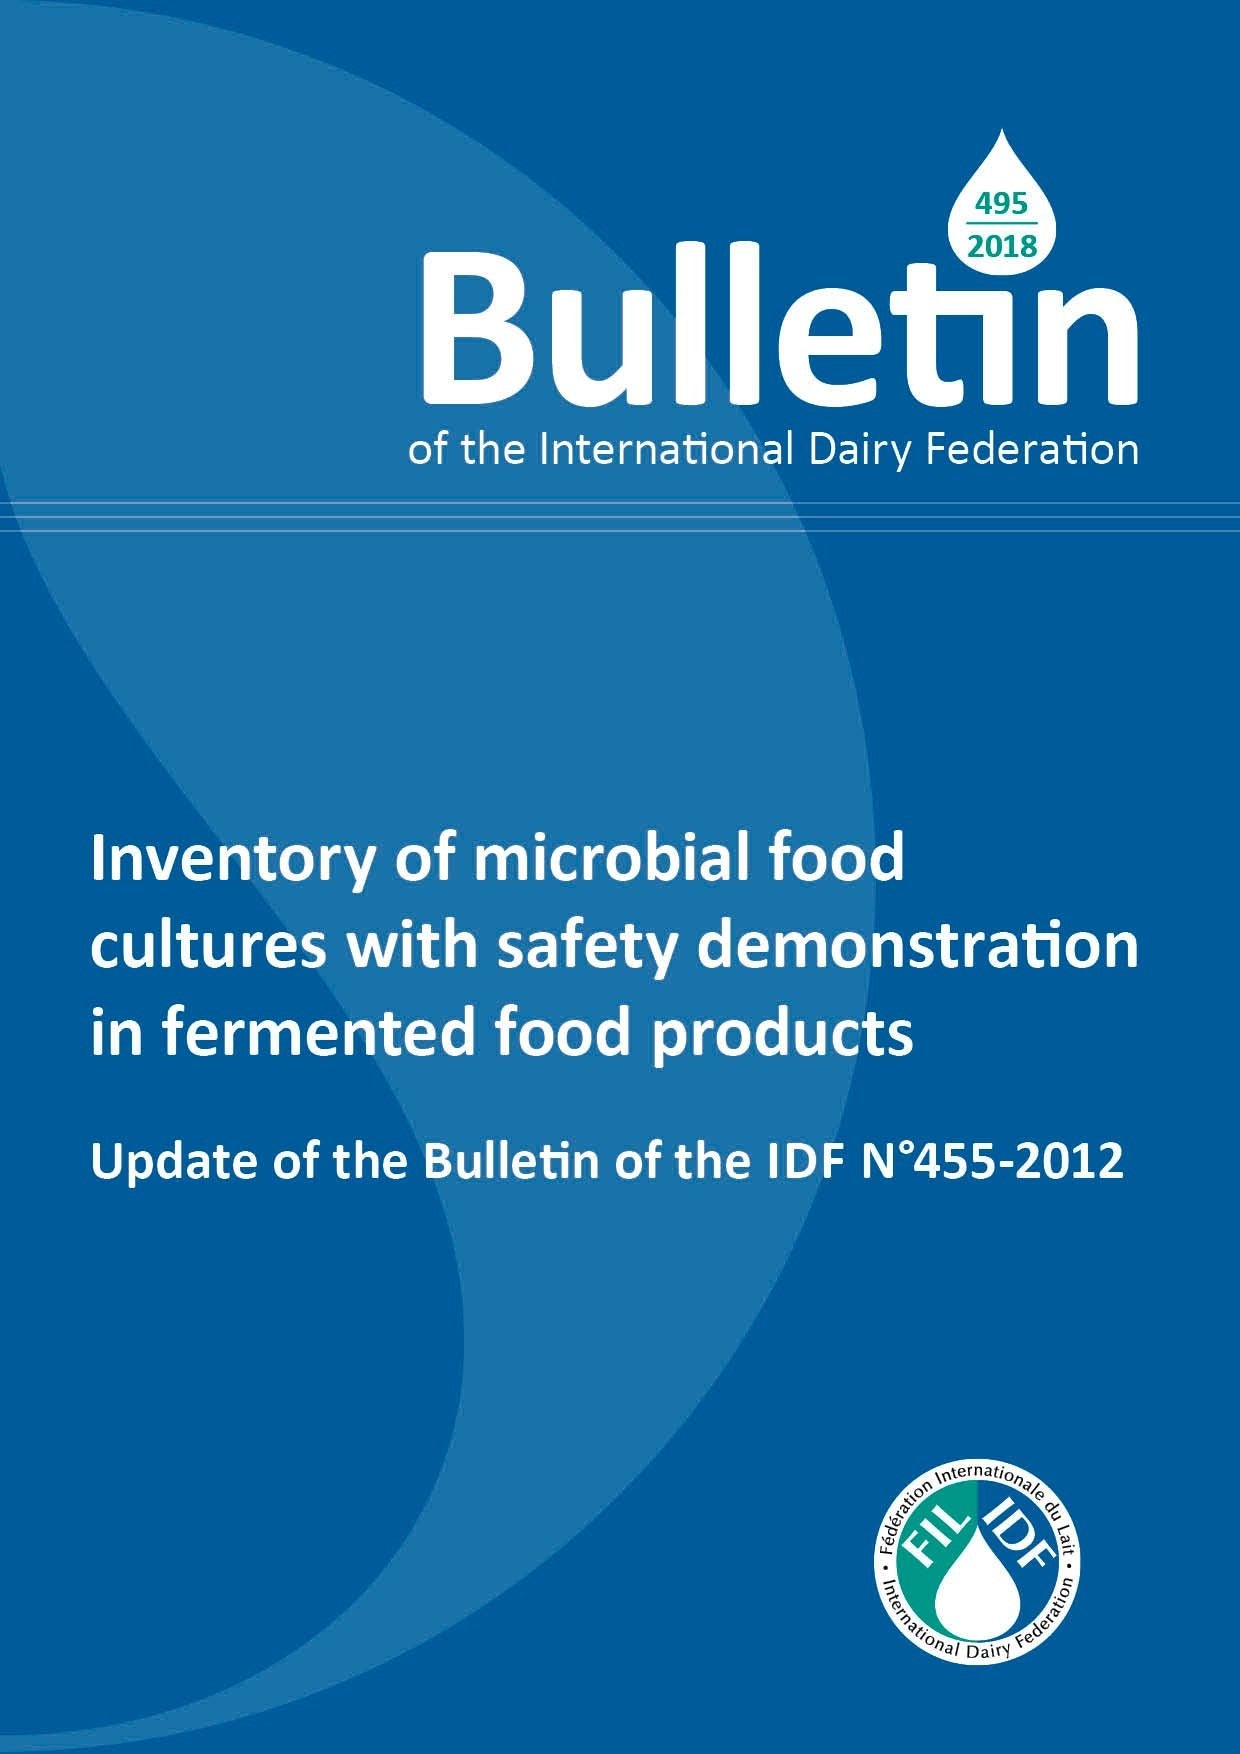 Bulletin of the IDF N° 495/ 2018: Inventory of microbial food cultures with safety demonstration in fermented food products - FIL-IDF